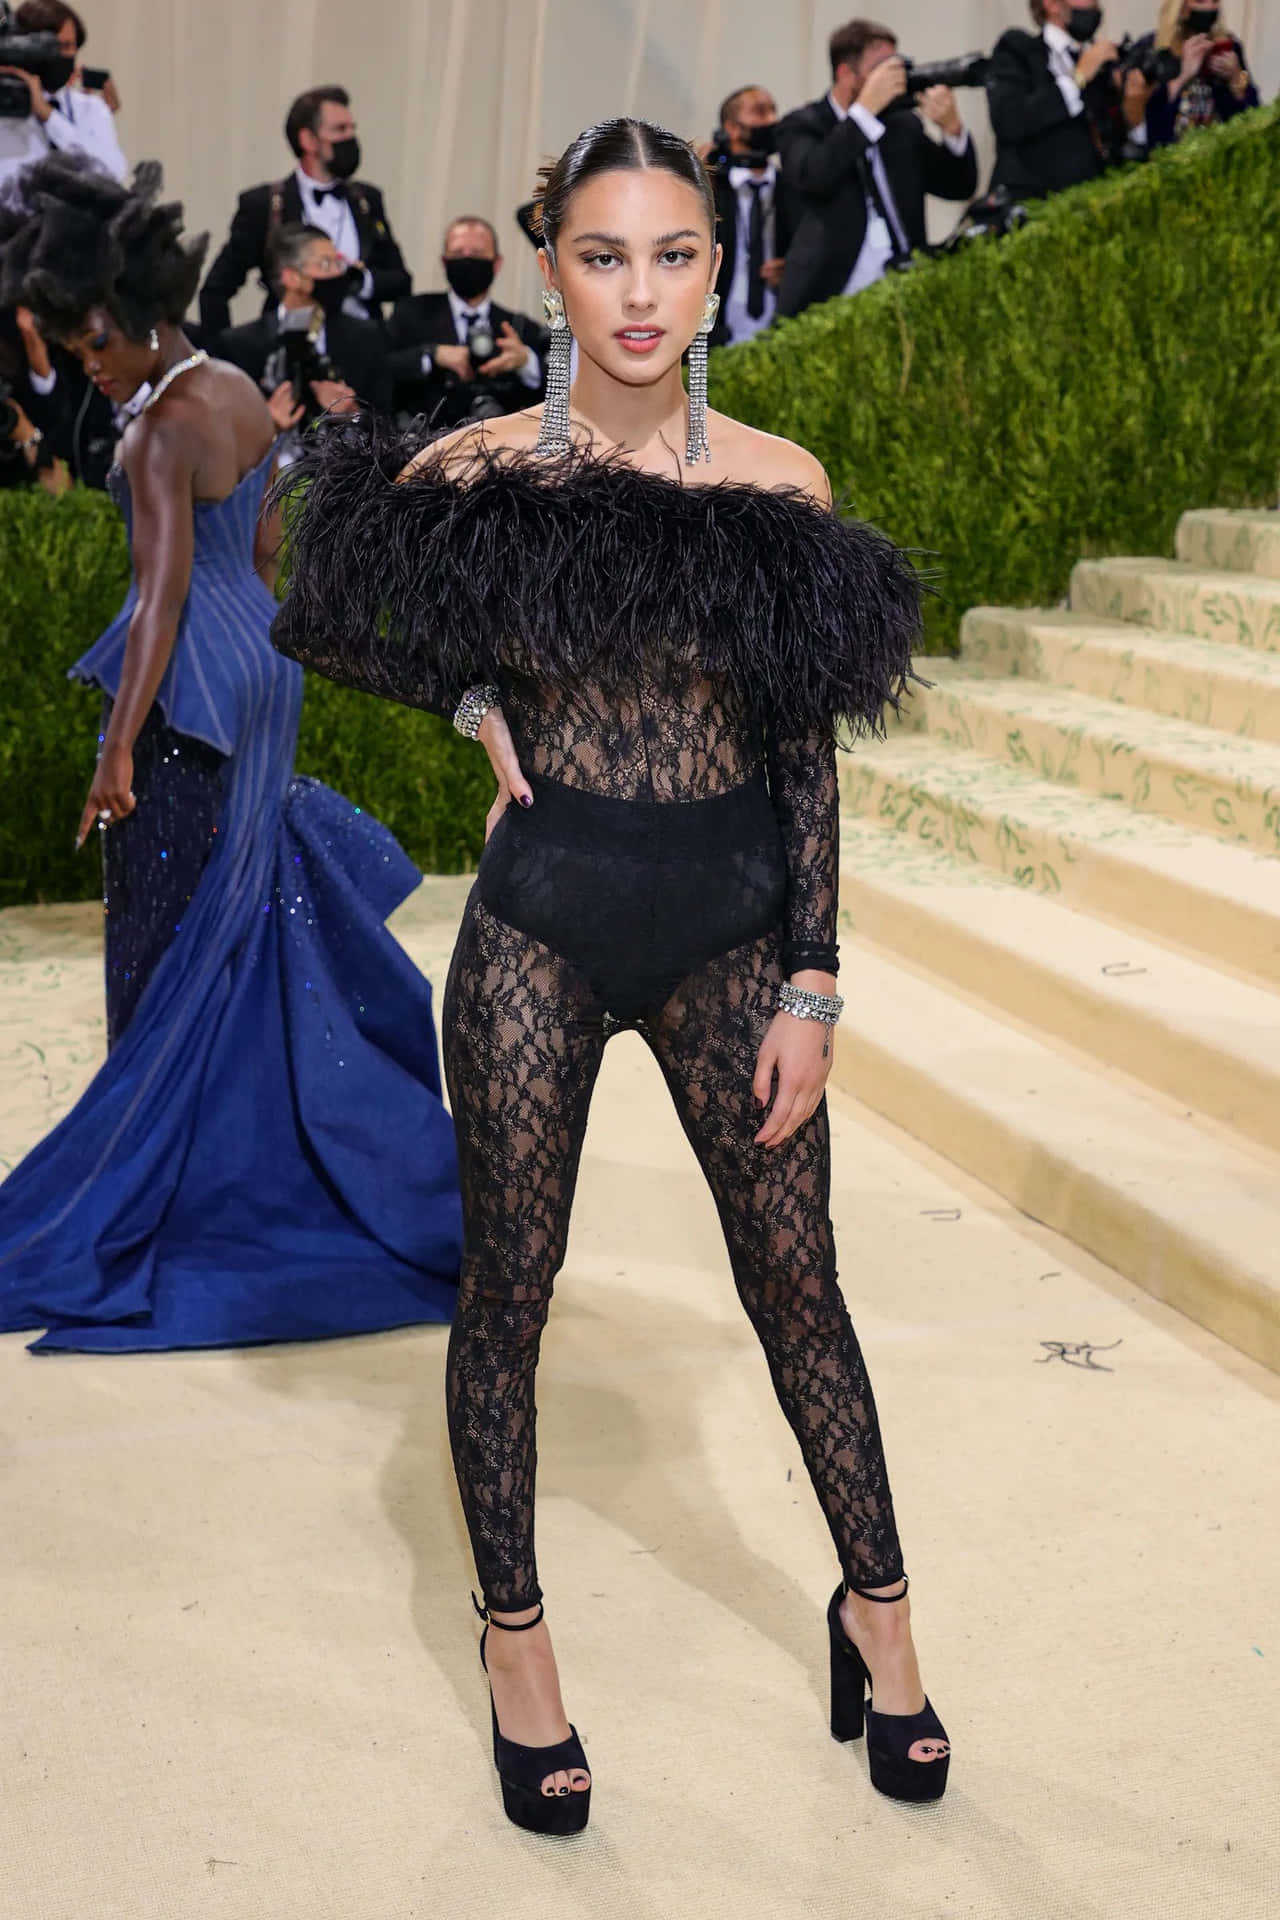 Stars Grace the Red Carpet at the Met Gala 2021